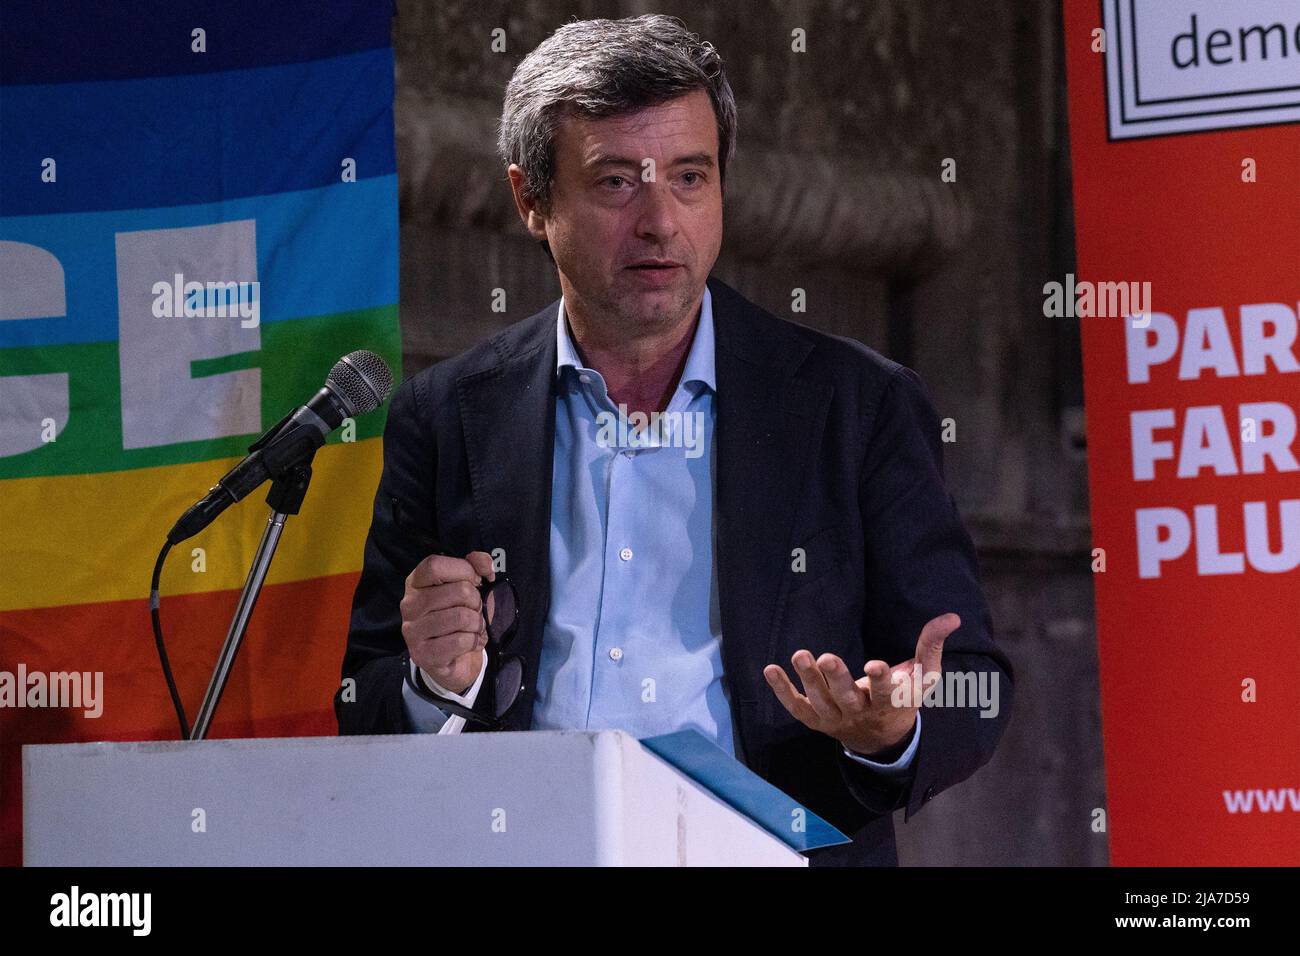 Naples, Italy. 27th May, 2022. Andrea Orlando, Minister of Labor, during his speech at the conference 'Naples free from the Camorra' held on May 27, 2022 at the Domus Ars Center for Music and Culture in Naples. Credit: Independent Photo Agency/Alamy Live News Stock Photo